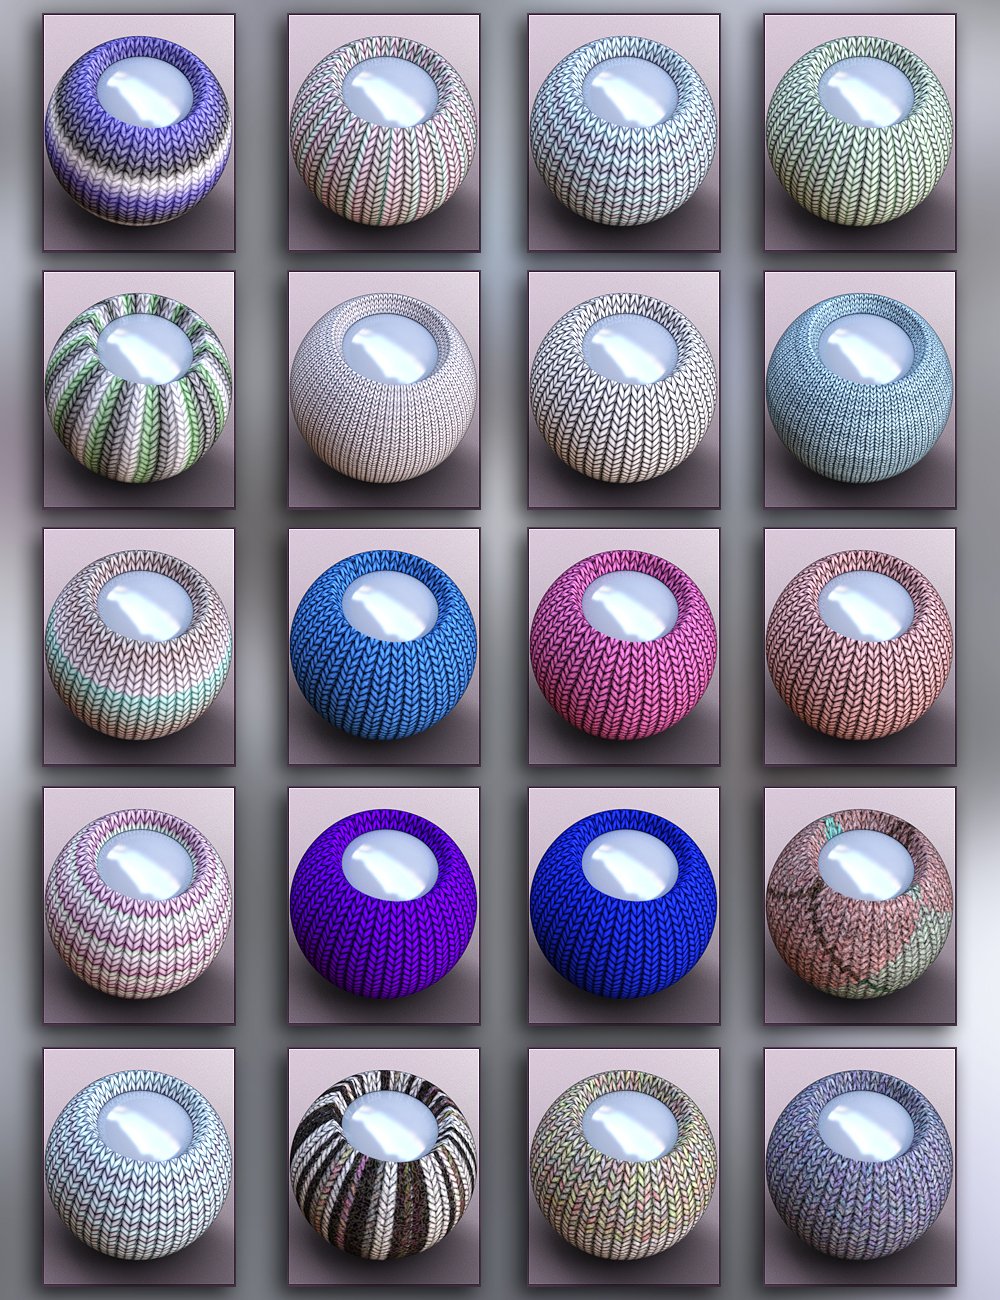 Everyday Fabric Shaders Iray by: JGreenlees, 3D Models by Daz 3D